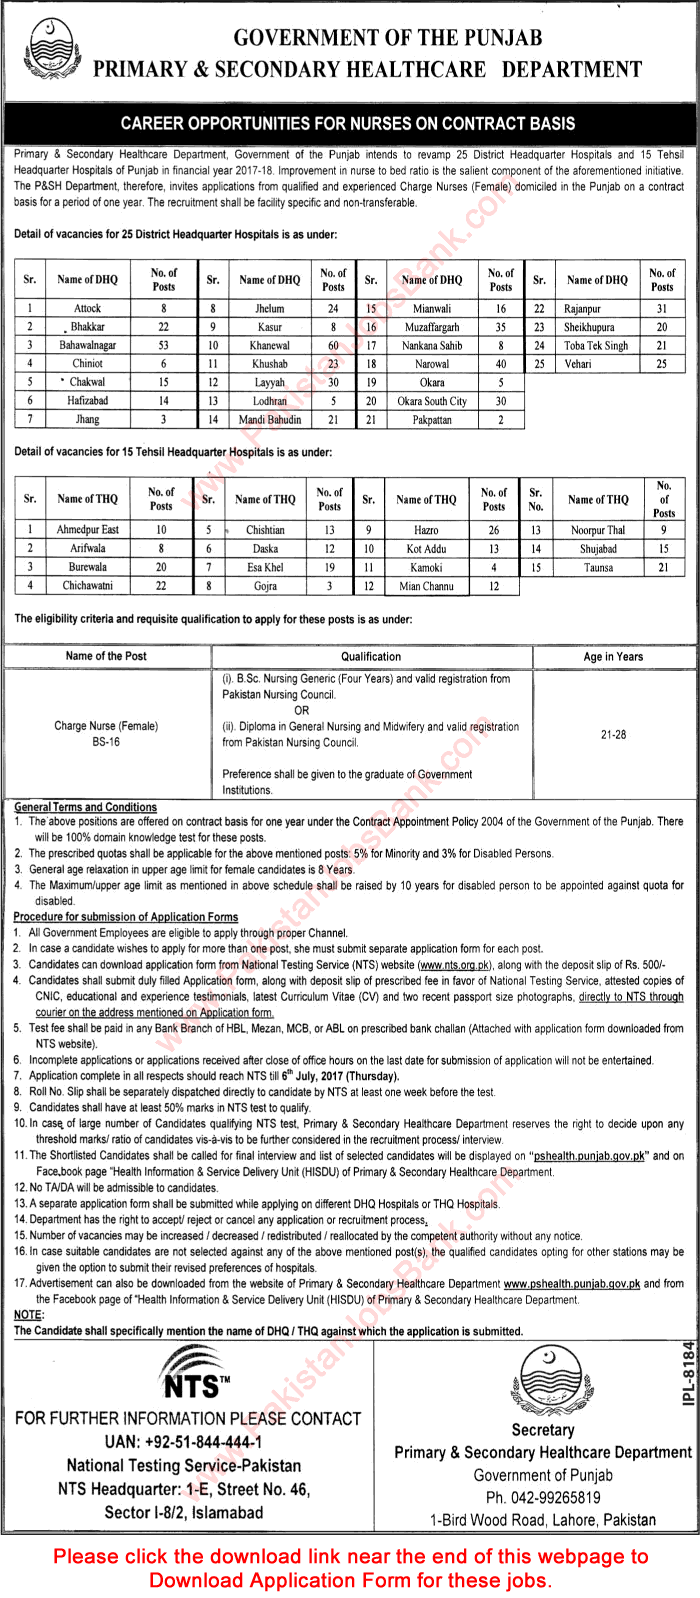 Charge Nurse Jobs in Primary and Secondary Healthcare Department June 2017 NTS Application Form Latest